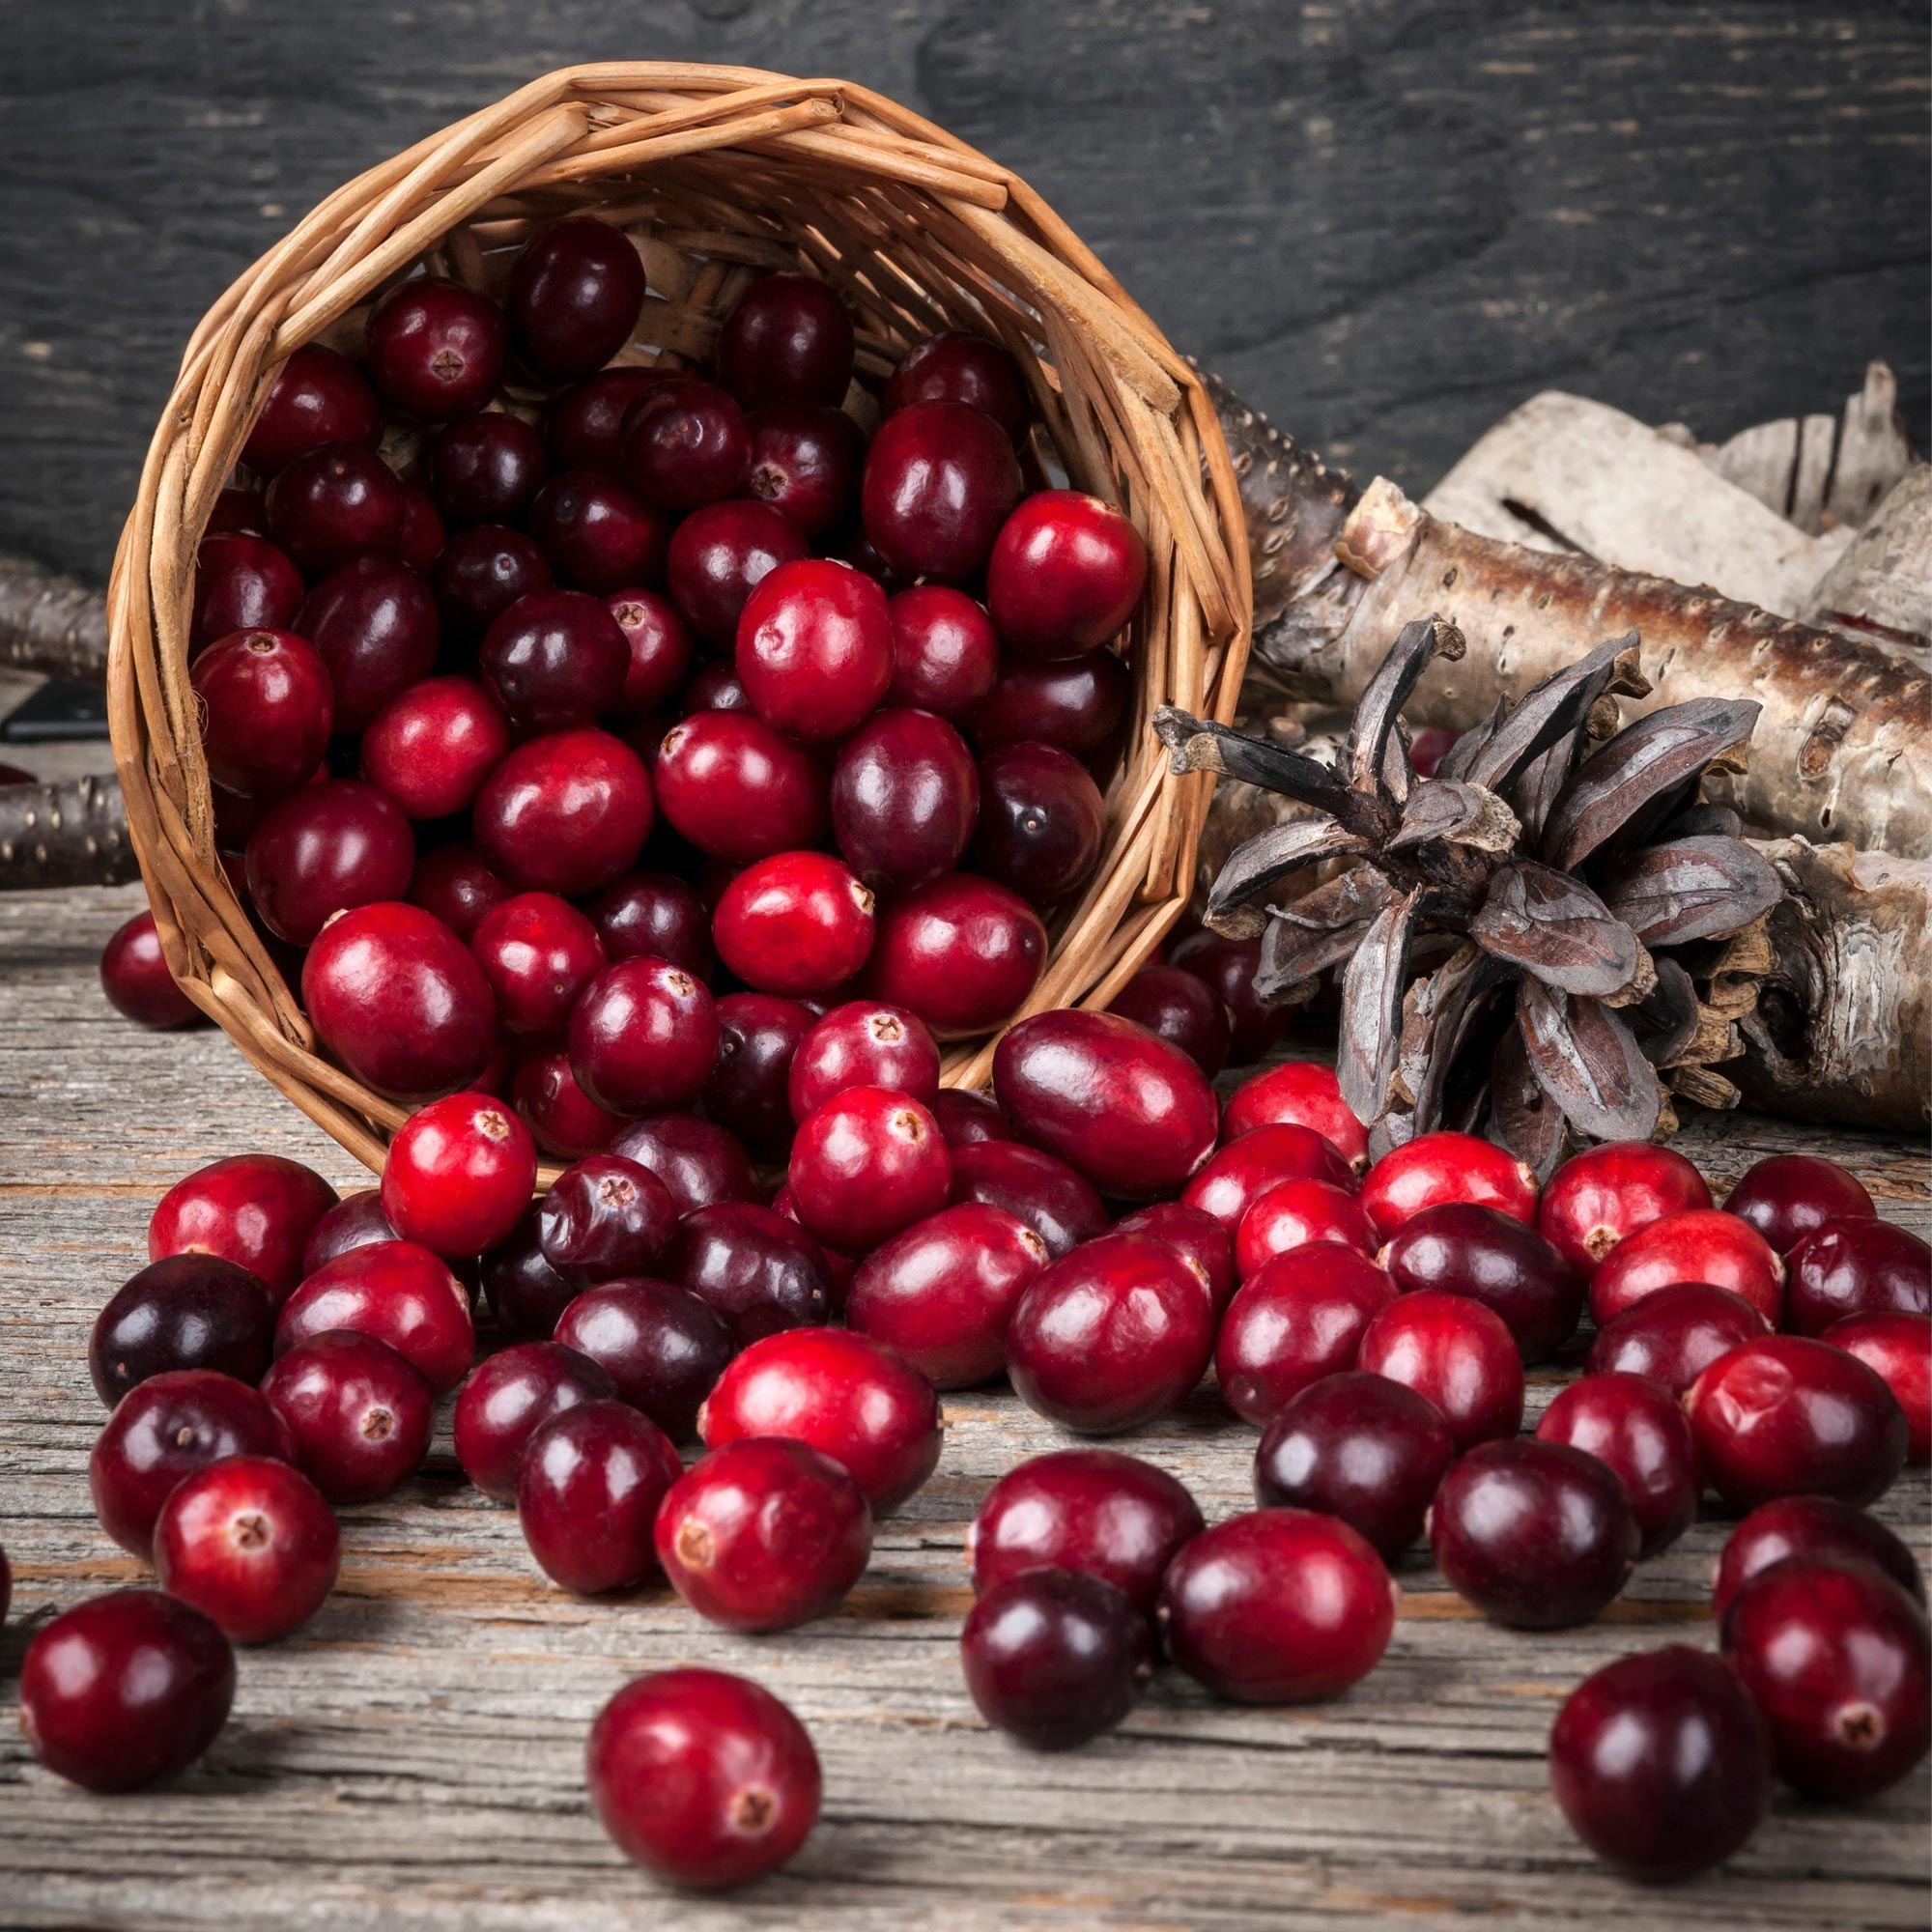 Eating Cranberries Daily Improves Cardiovascular Health